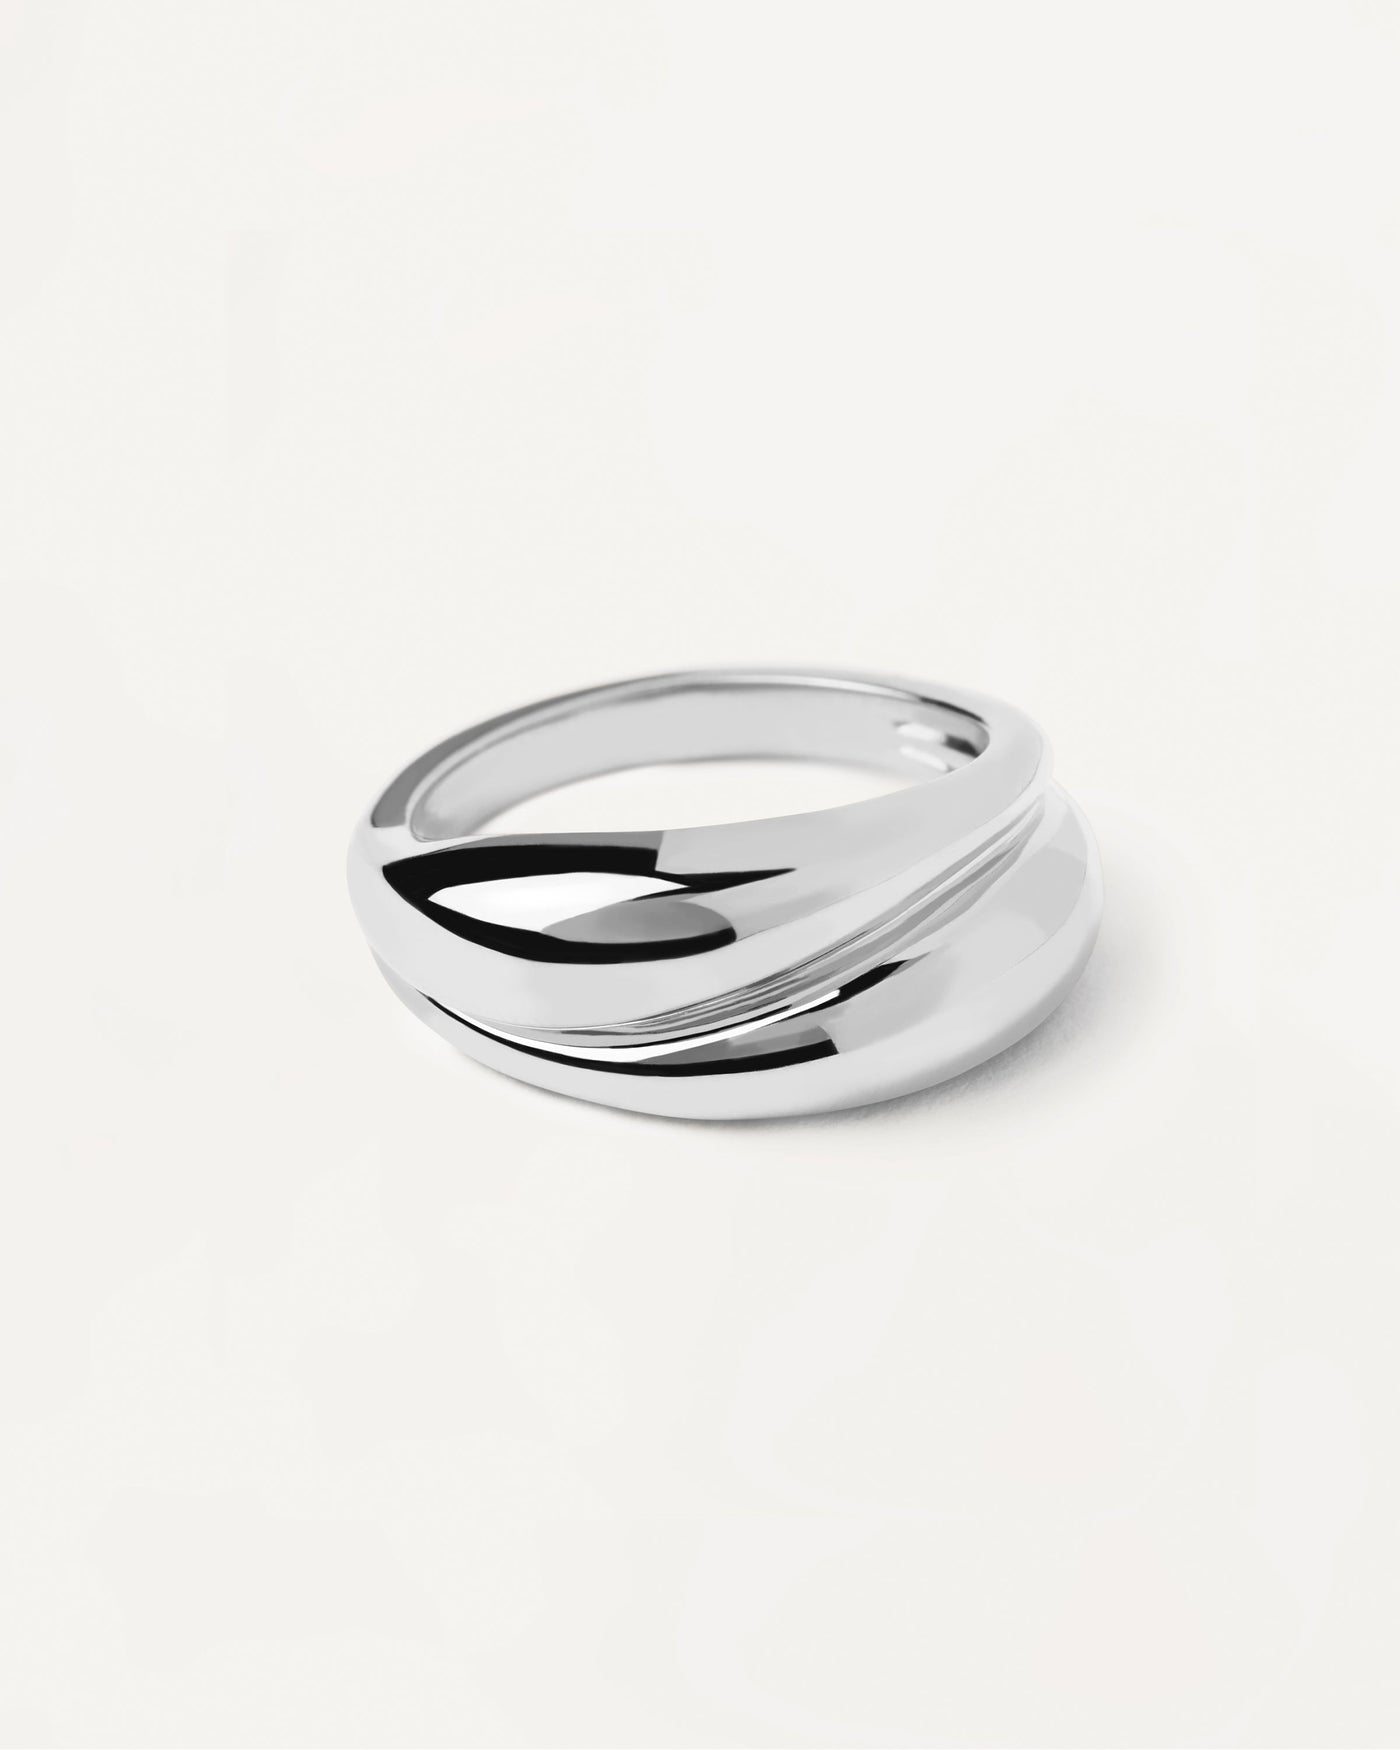 2023 Selection | Desire Silver Ring. Bold curvy ring in sterling silver. Get the latest arrival from PDPAOLA. Place your order safely and get this Best Seller. Free Shipping.